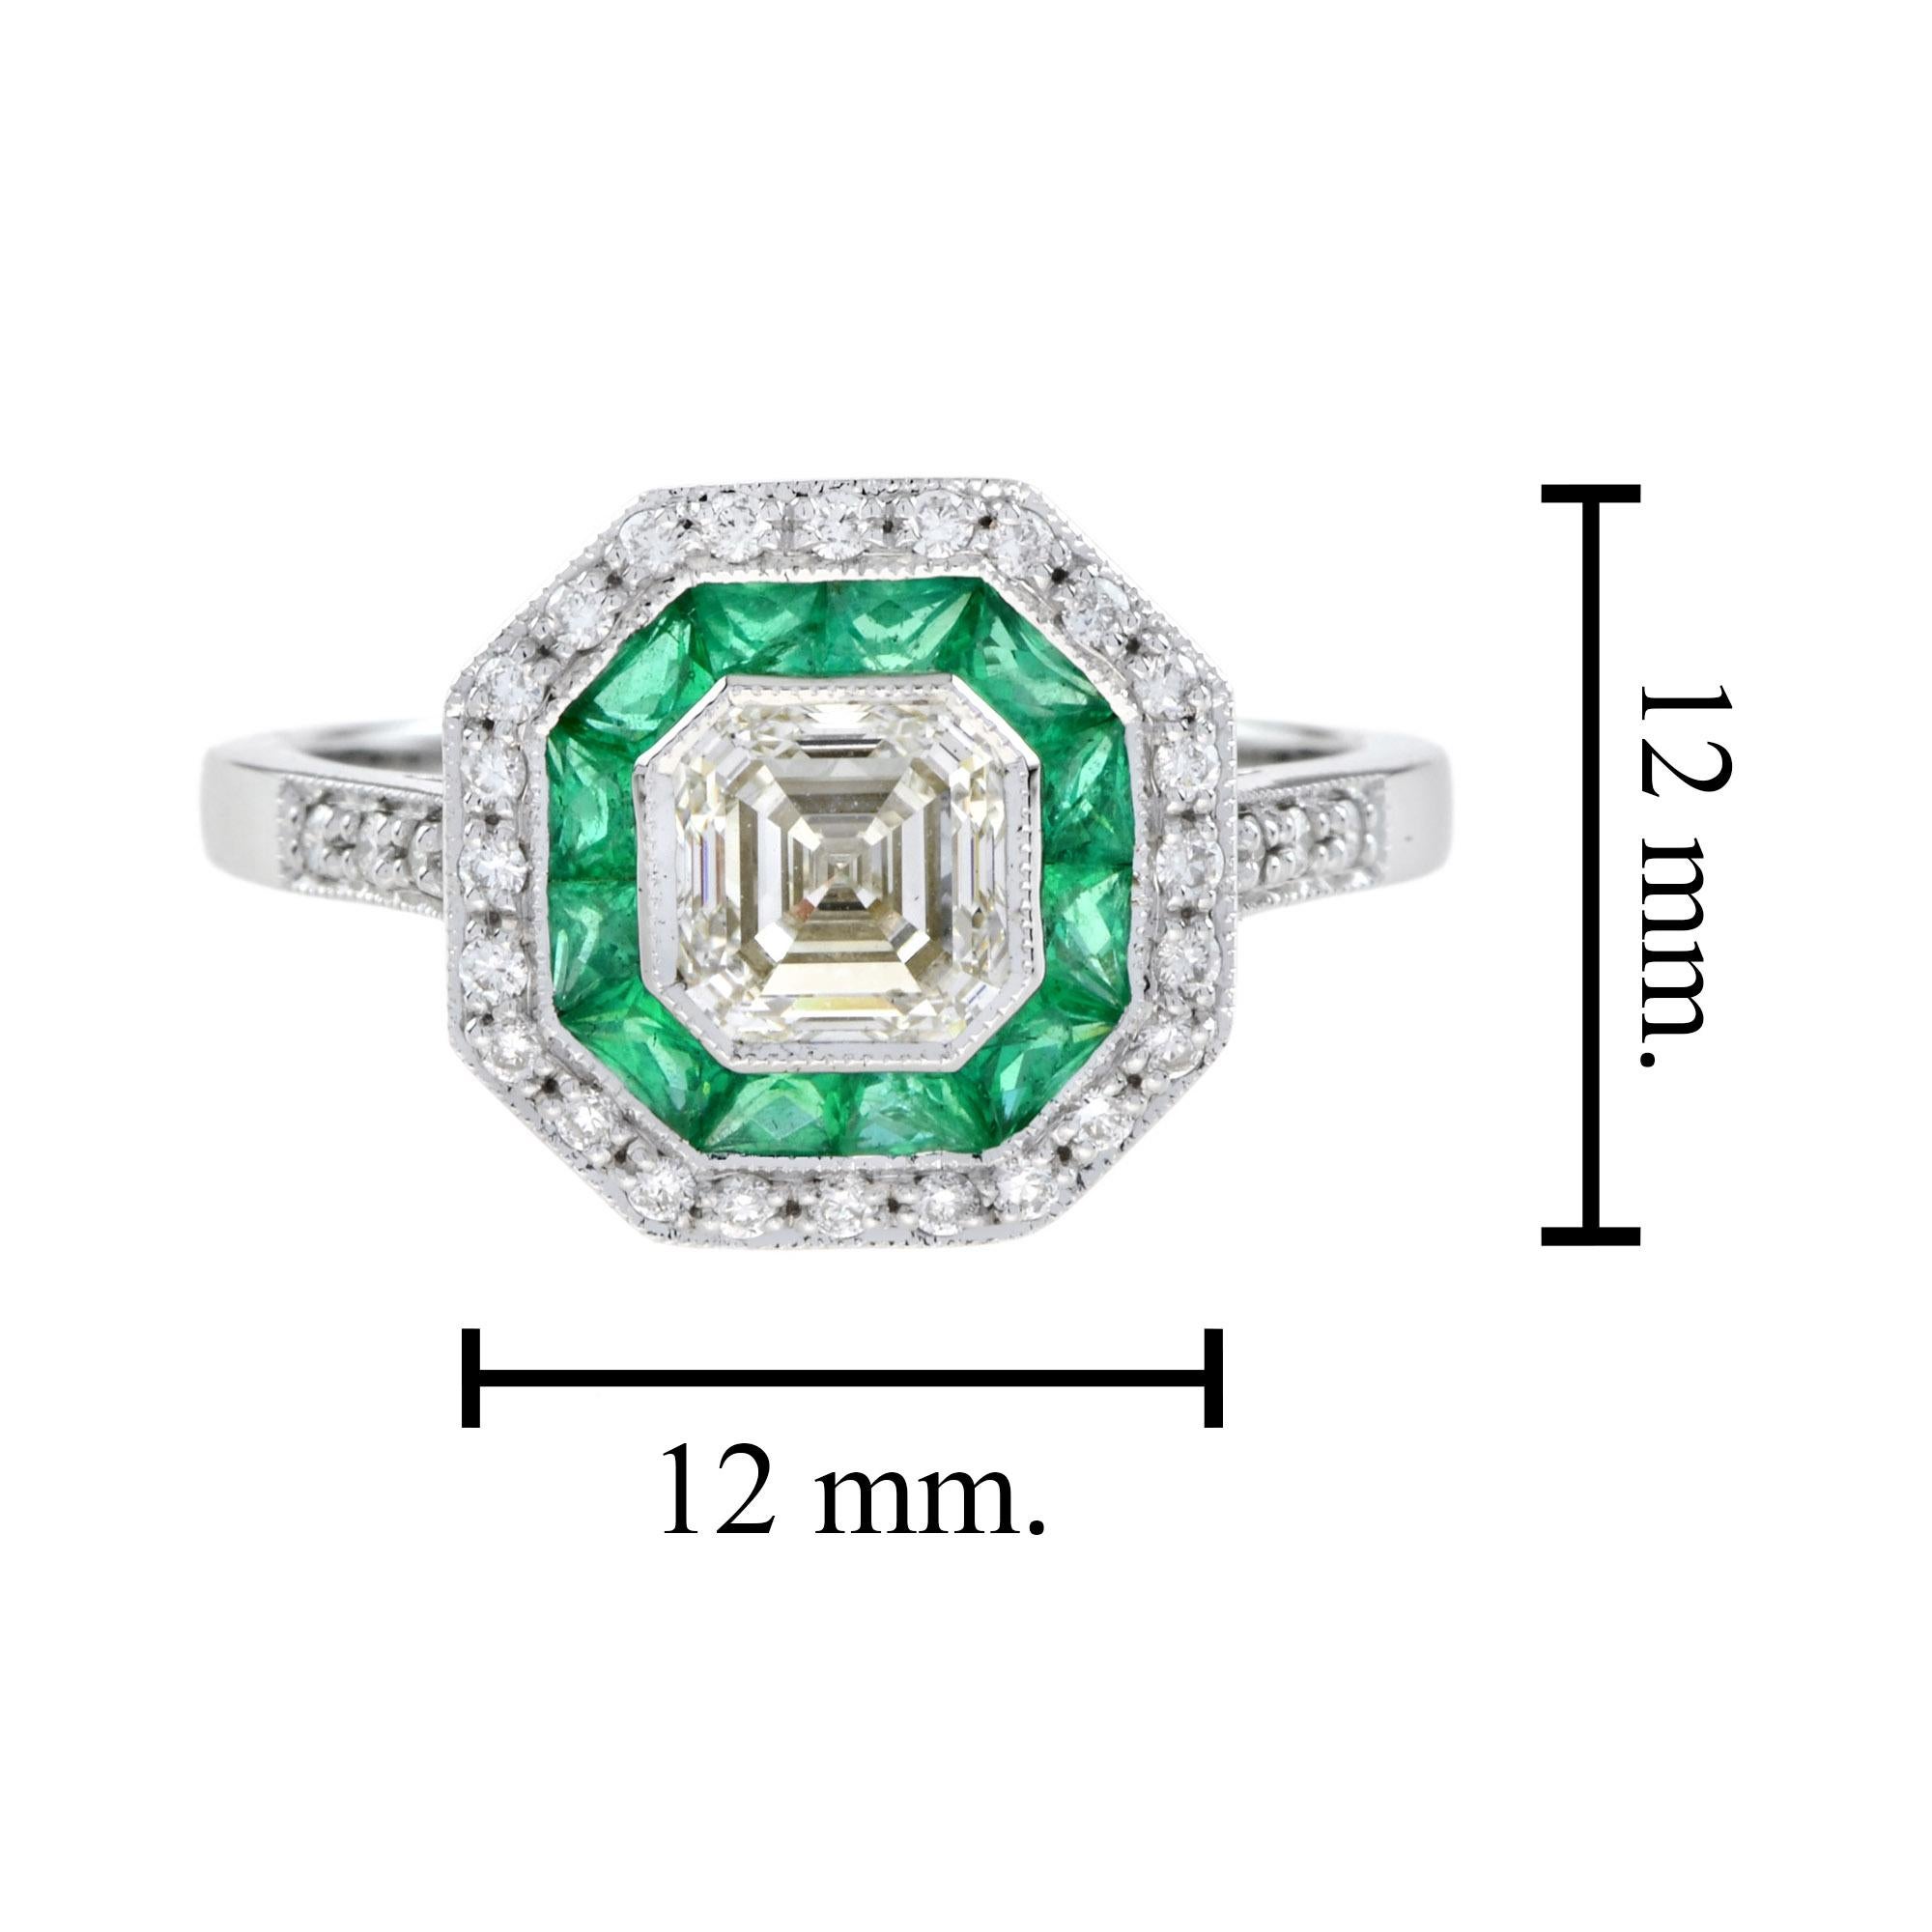 Art Deco Style Asscher Cut Diamond and Emerald Engagement Ring in 18K White Gold For Sale 4